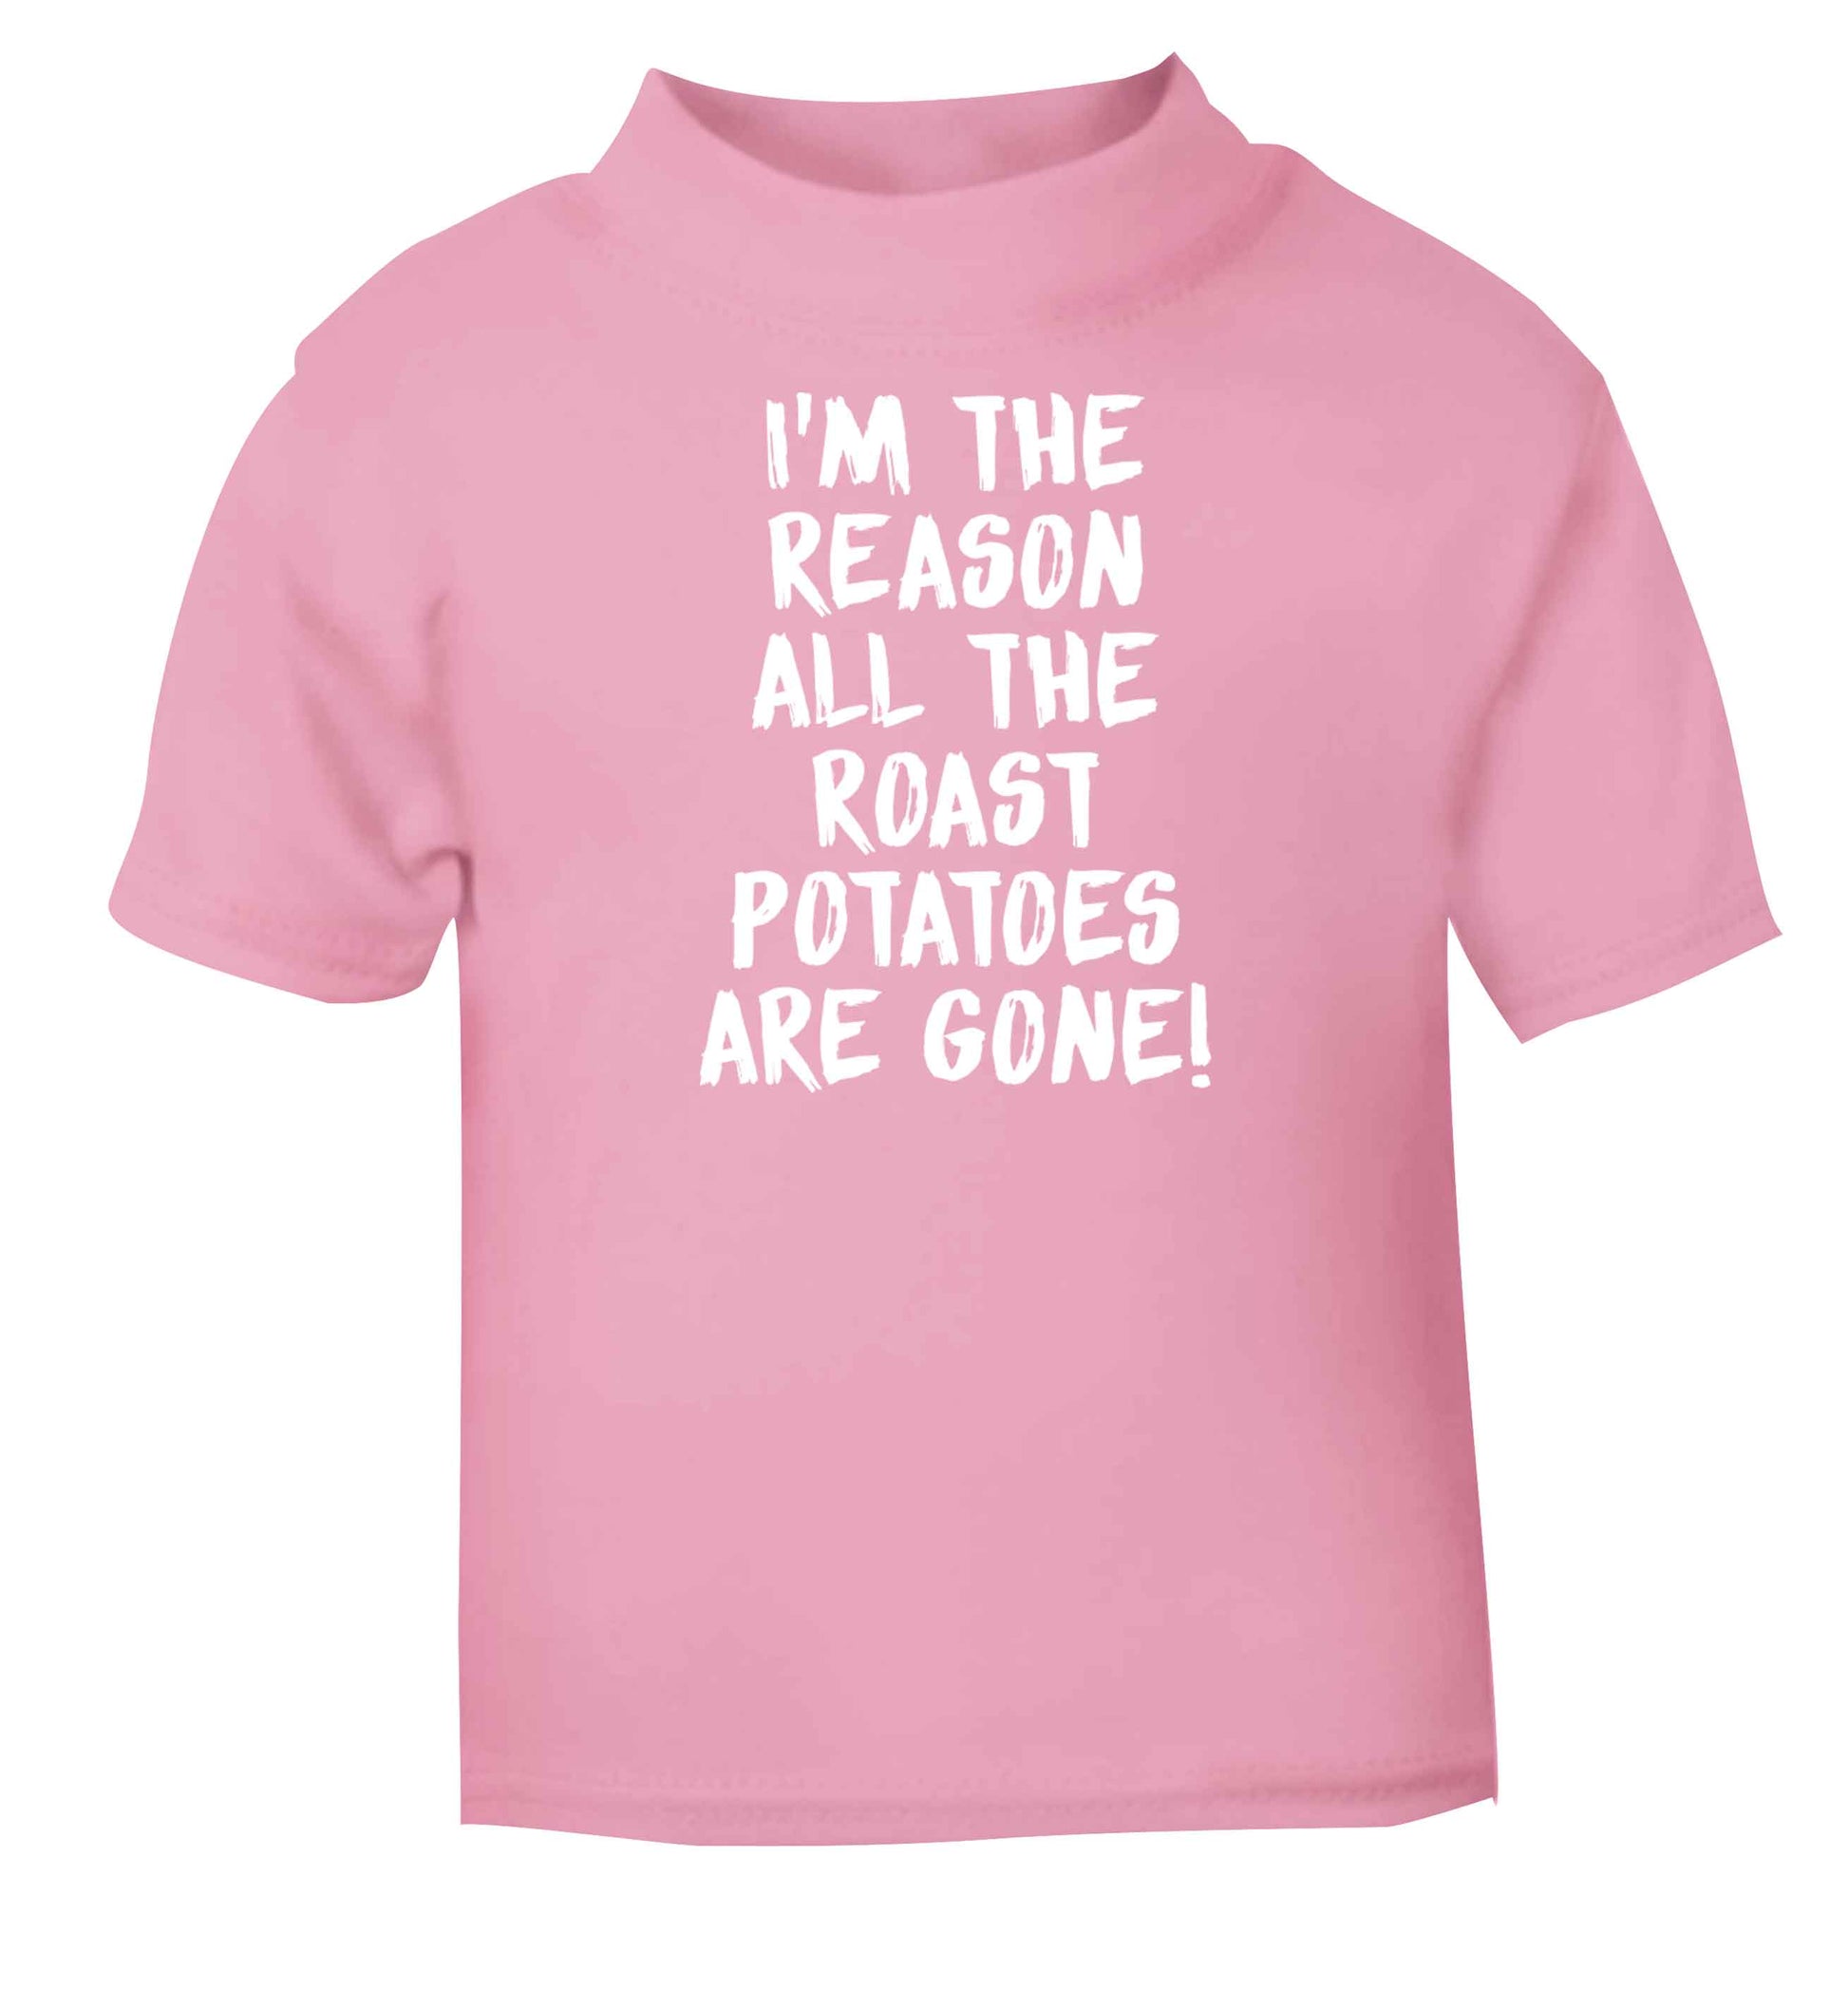 I'm the reason all the roast potatoes are gone light pink baby toddler Tshirt 2 Years